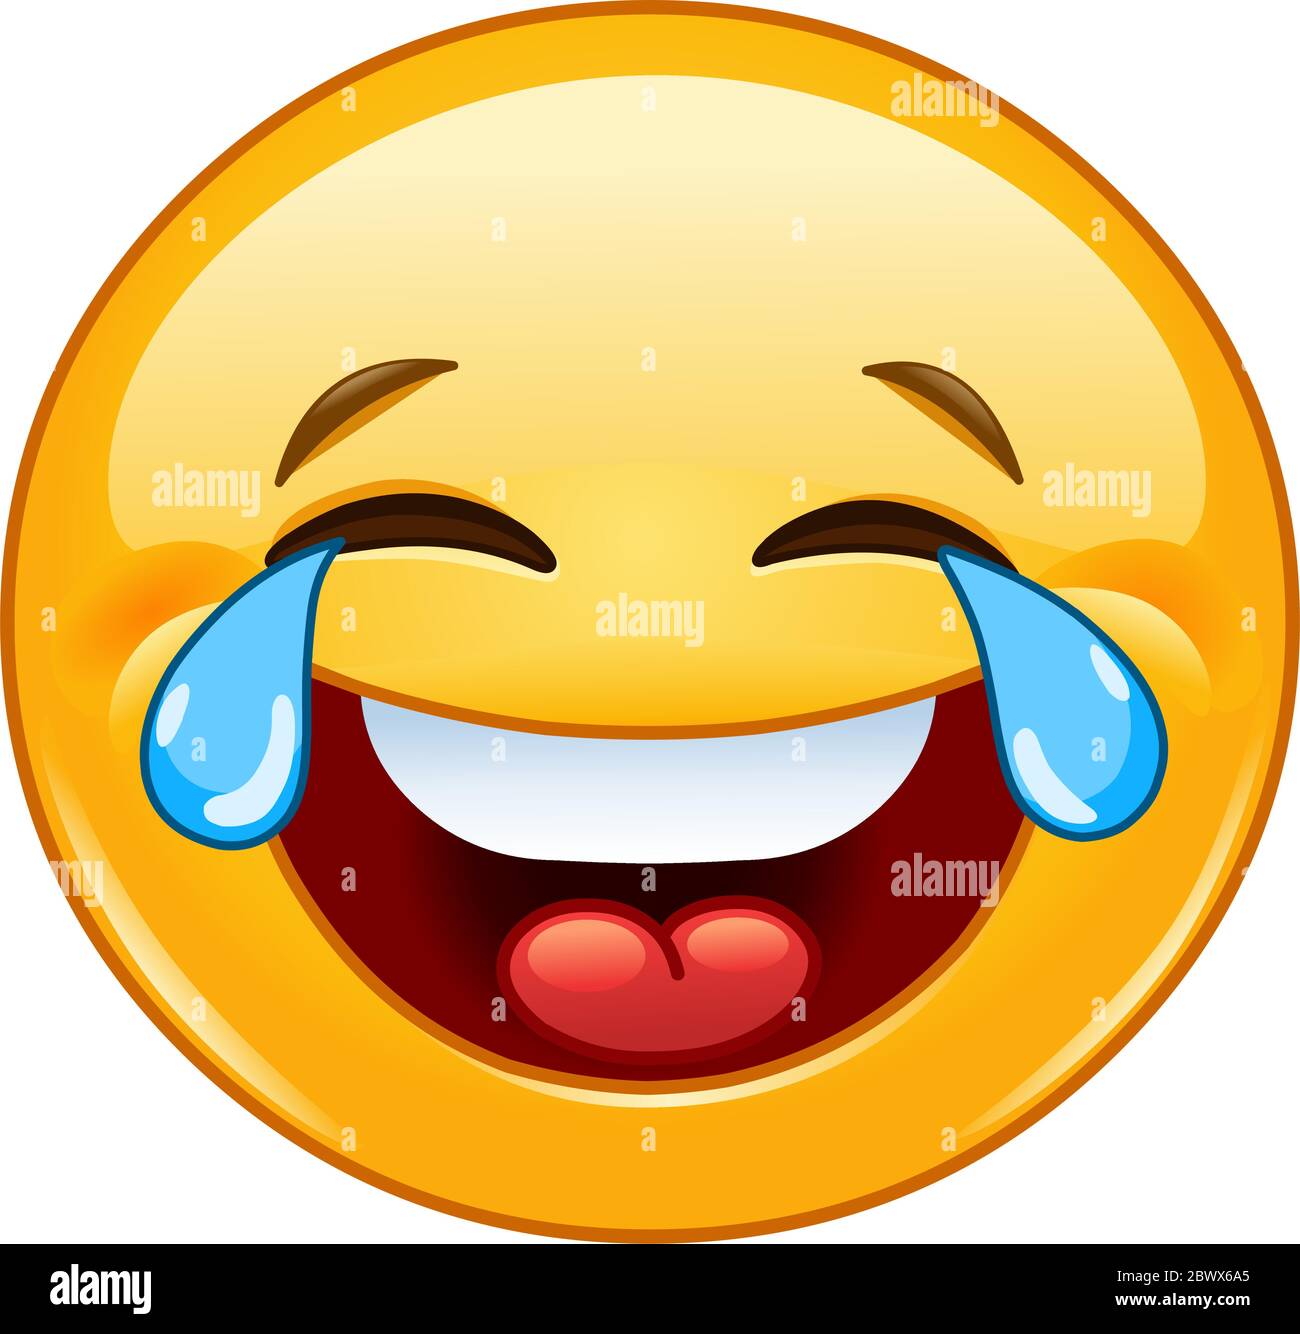 Laughing emoticon with tears of joy Stock Vector